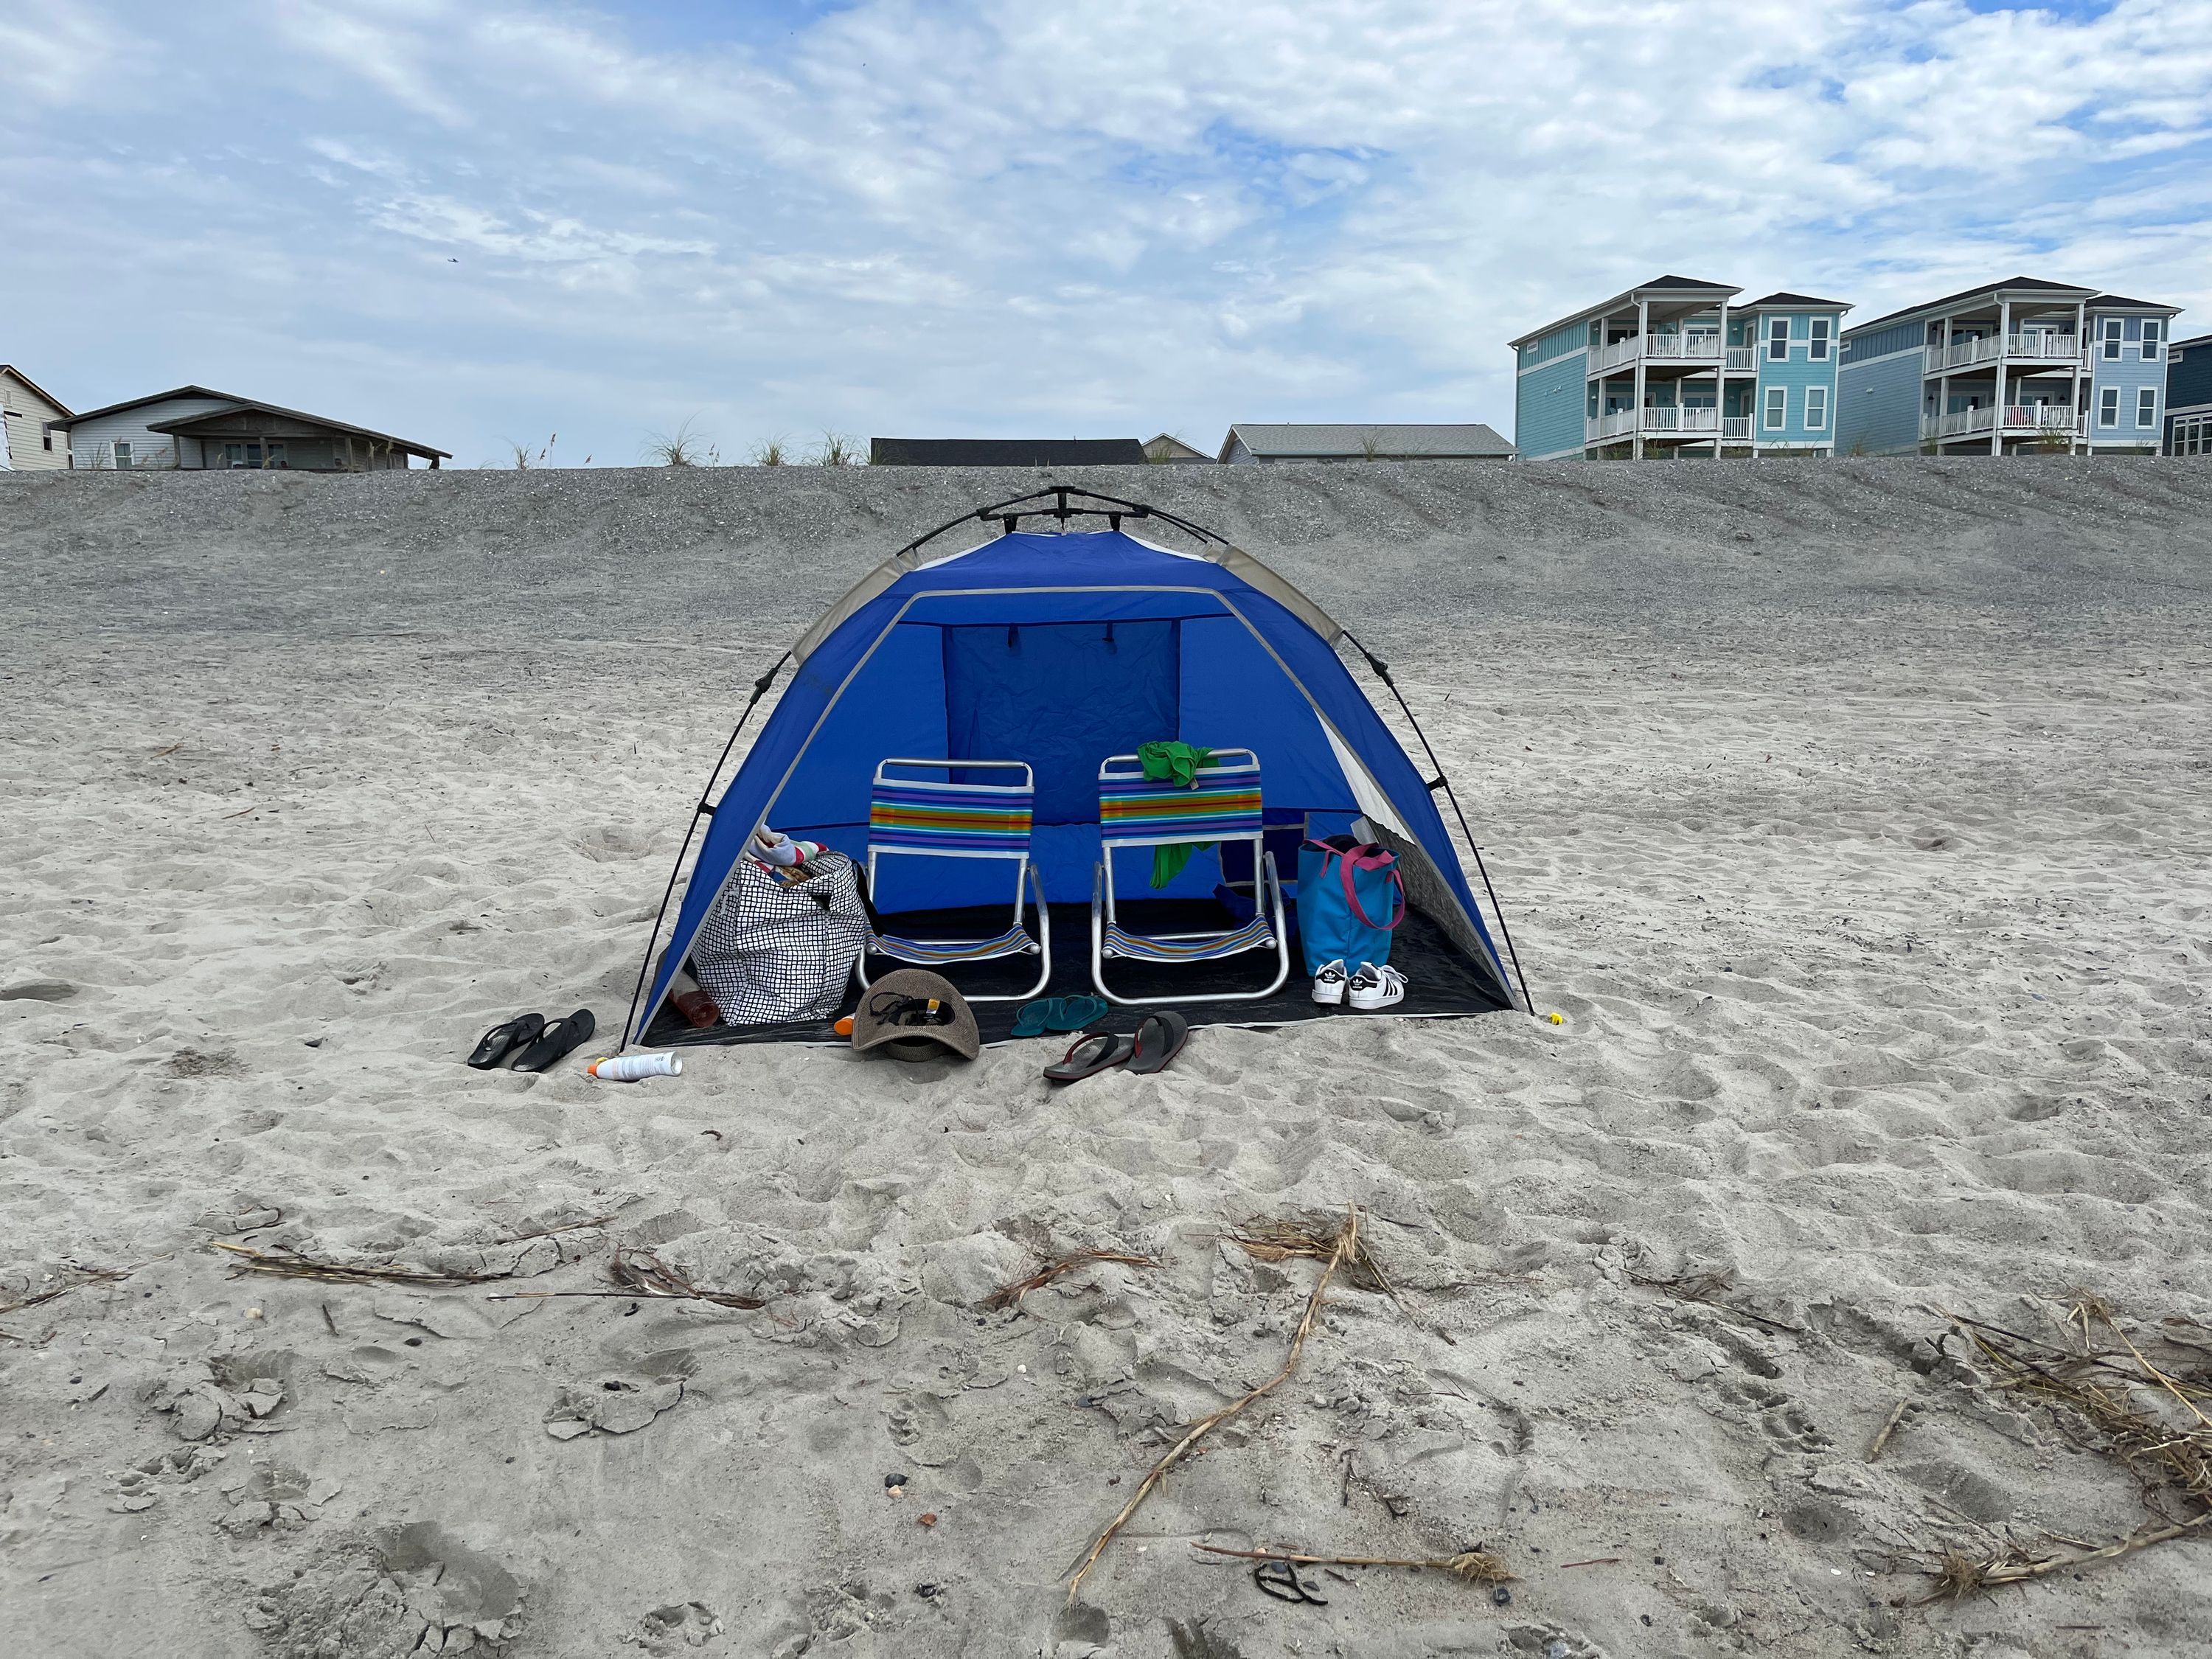 Camping out at the beach